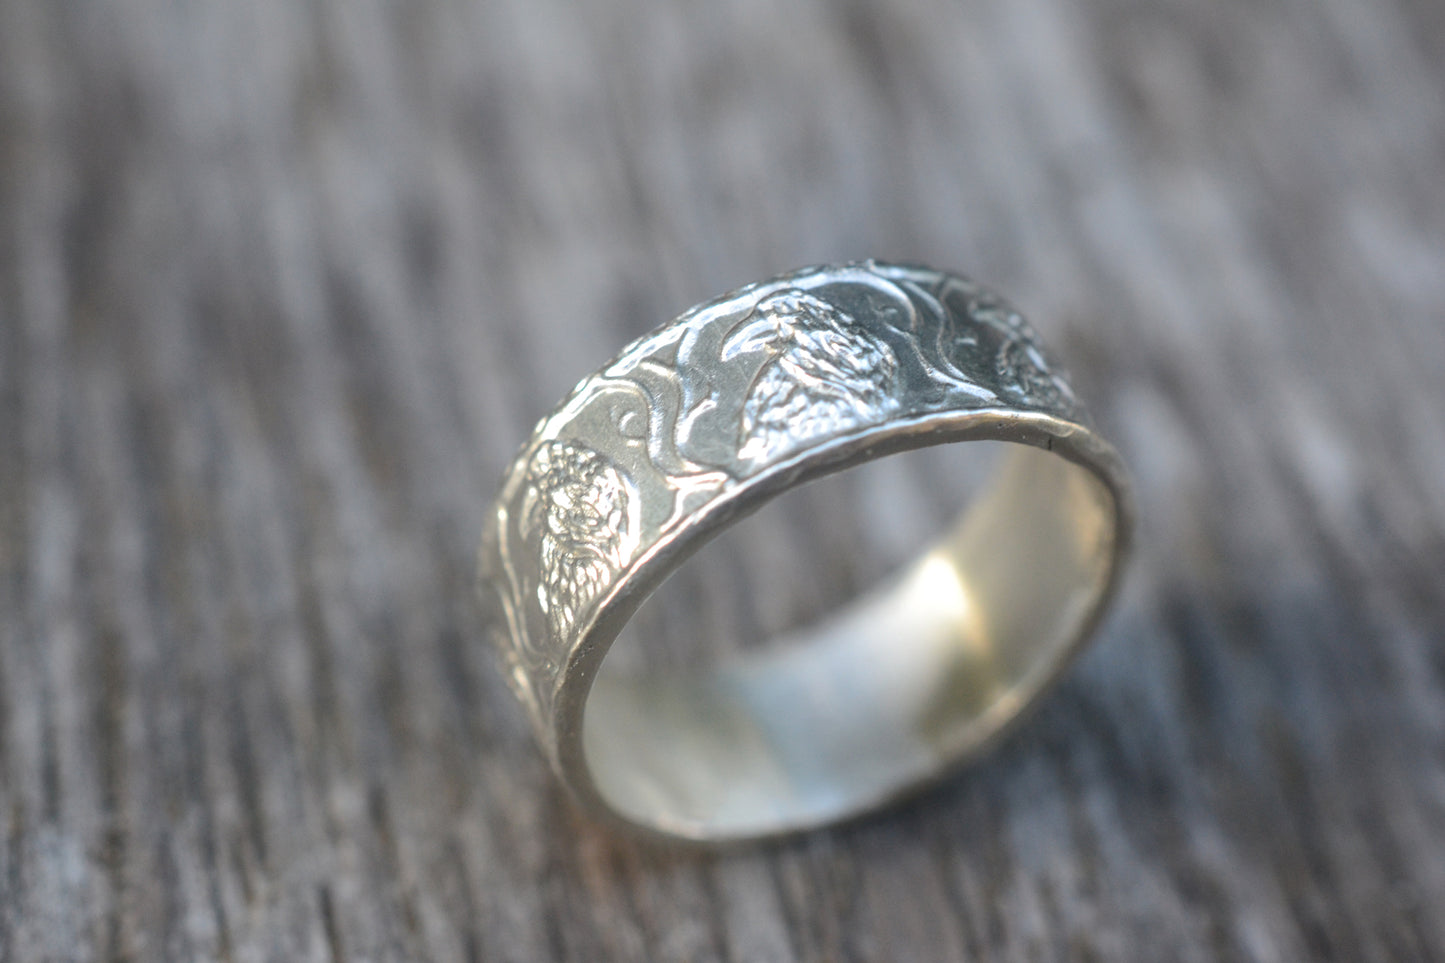 Wide Sterling Silver Wedding Band With Birds